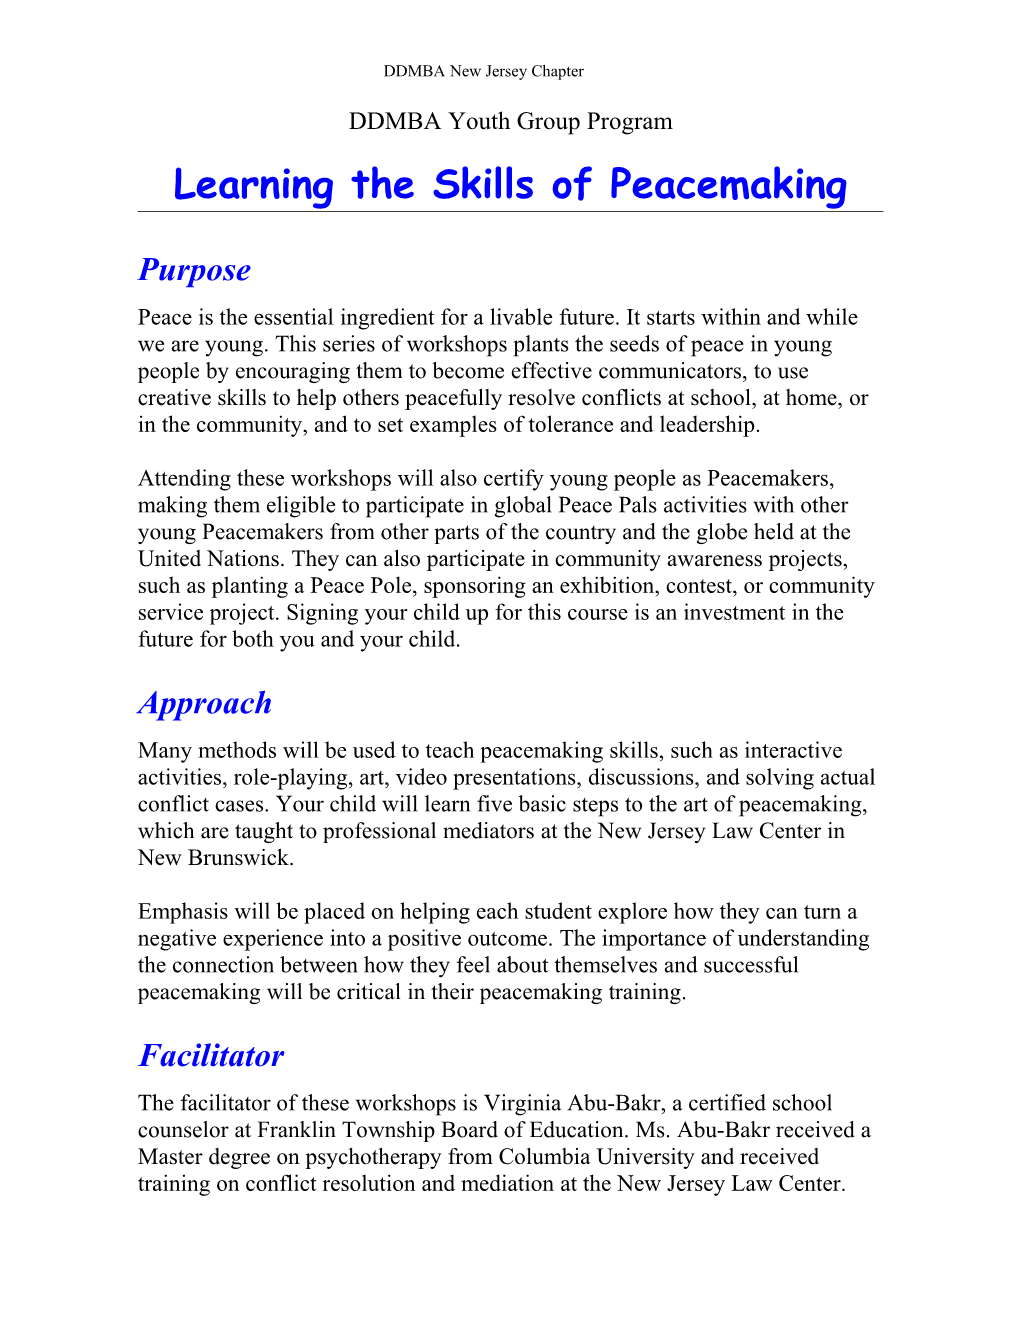 DDMBA-NJ Youth Group Program - Peacemaking